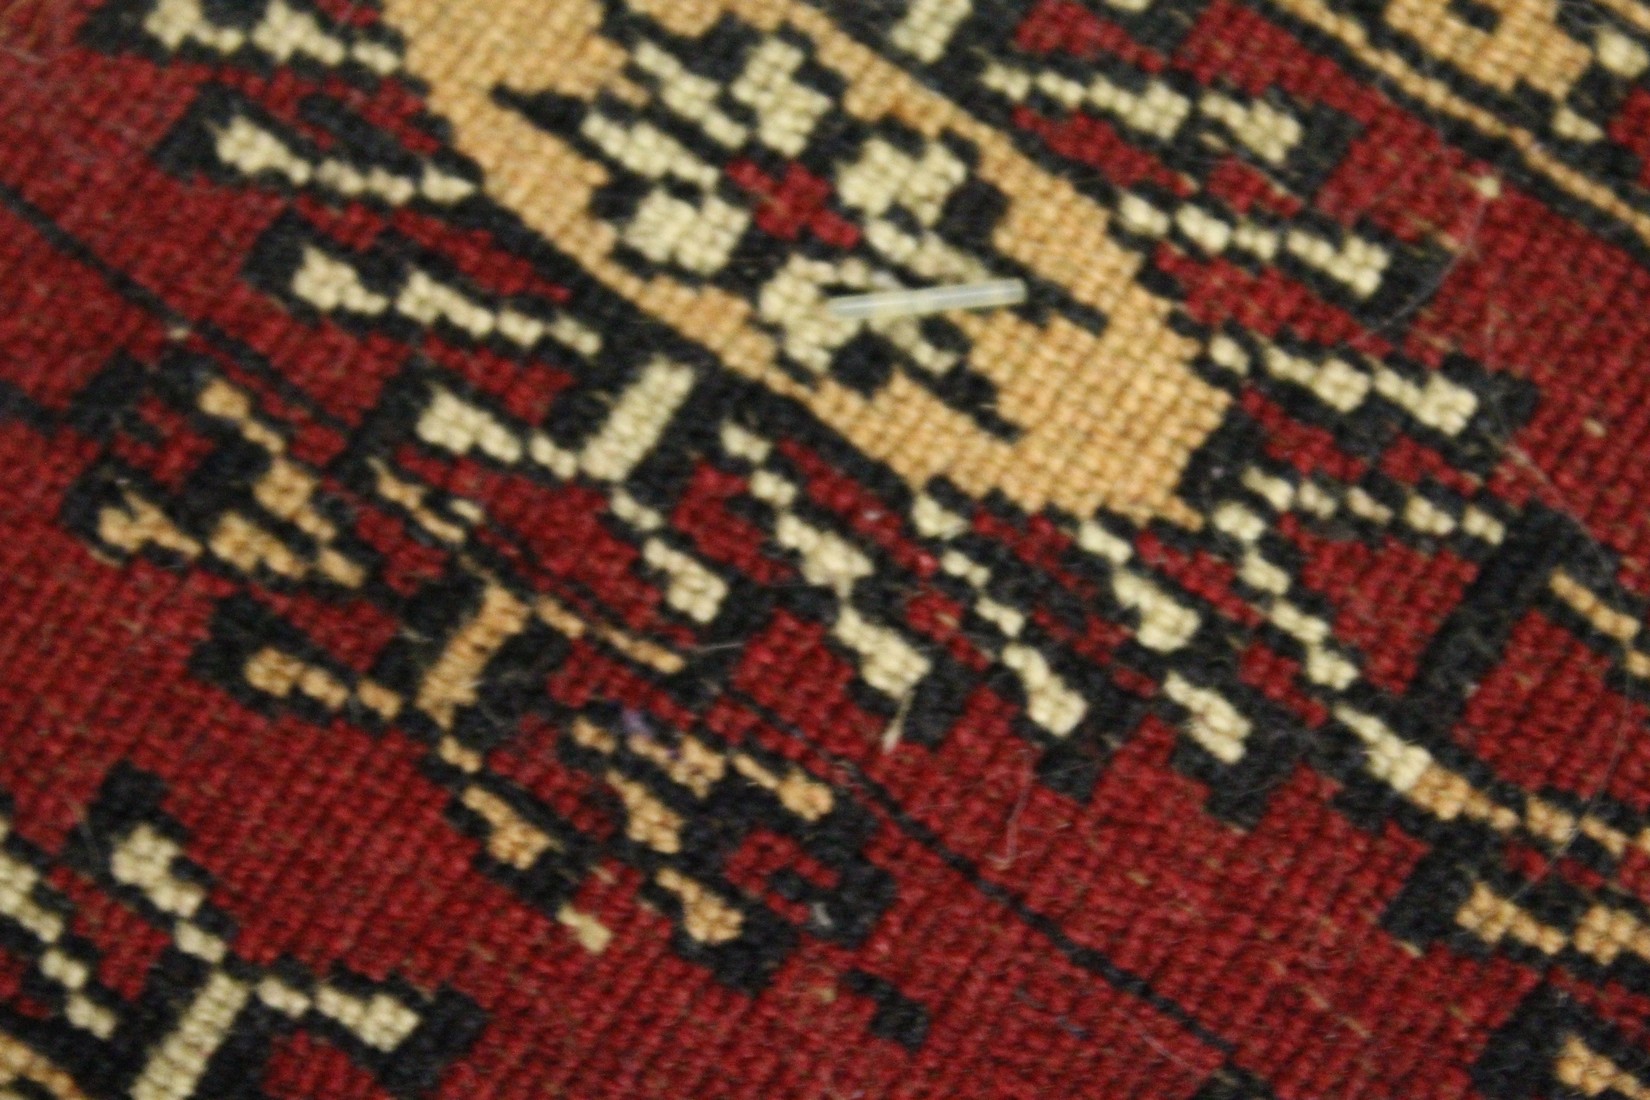 A SMALL BOKHARA RUG, with a single row of five medallions. 2ft 8ins x 2ft 1ins. - Image 4 of 4